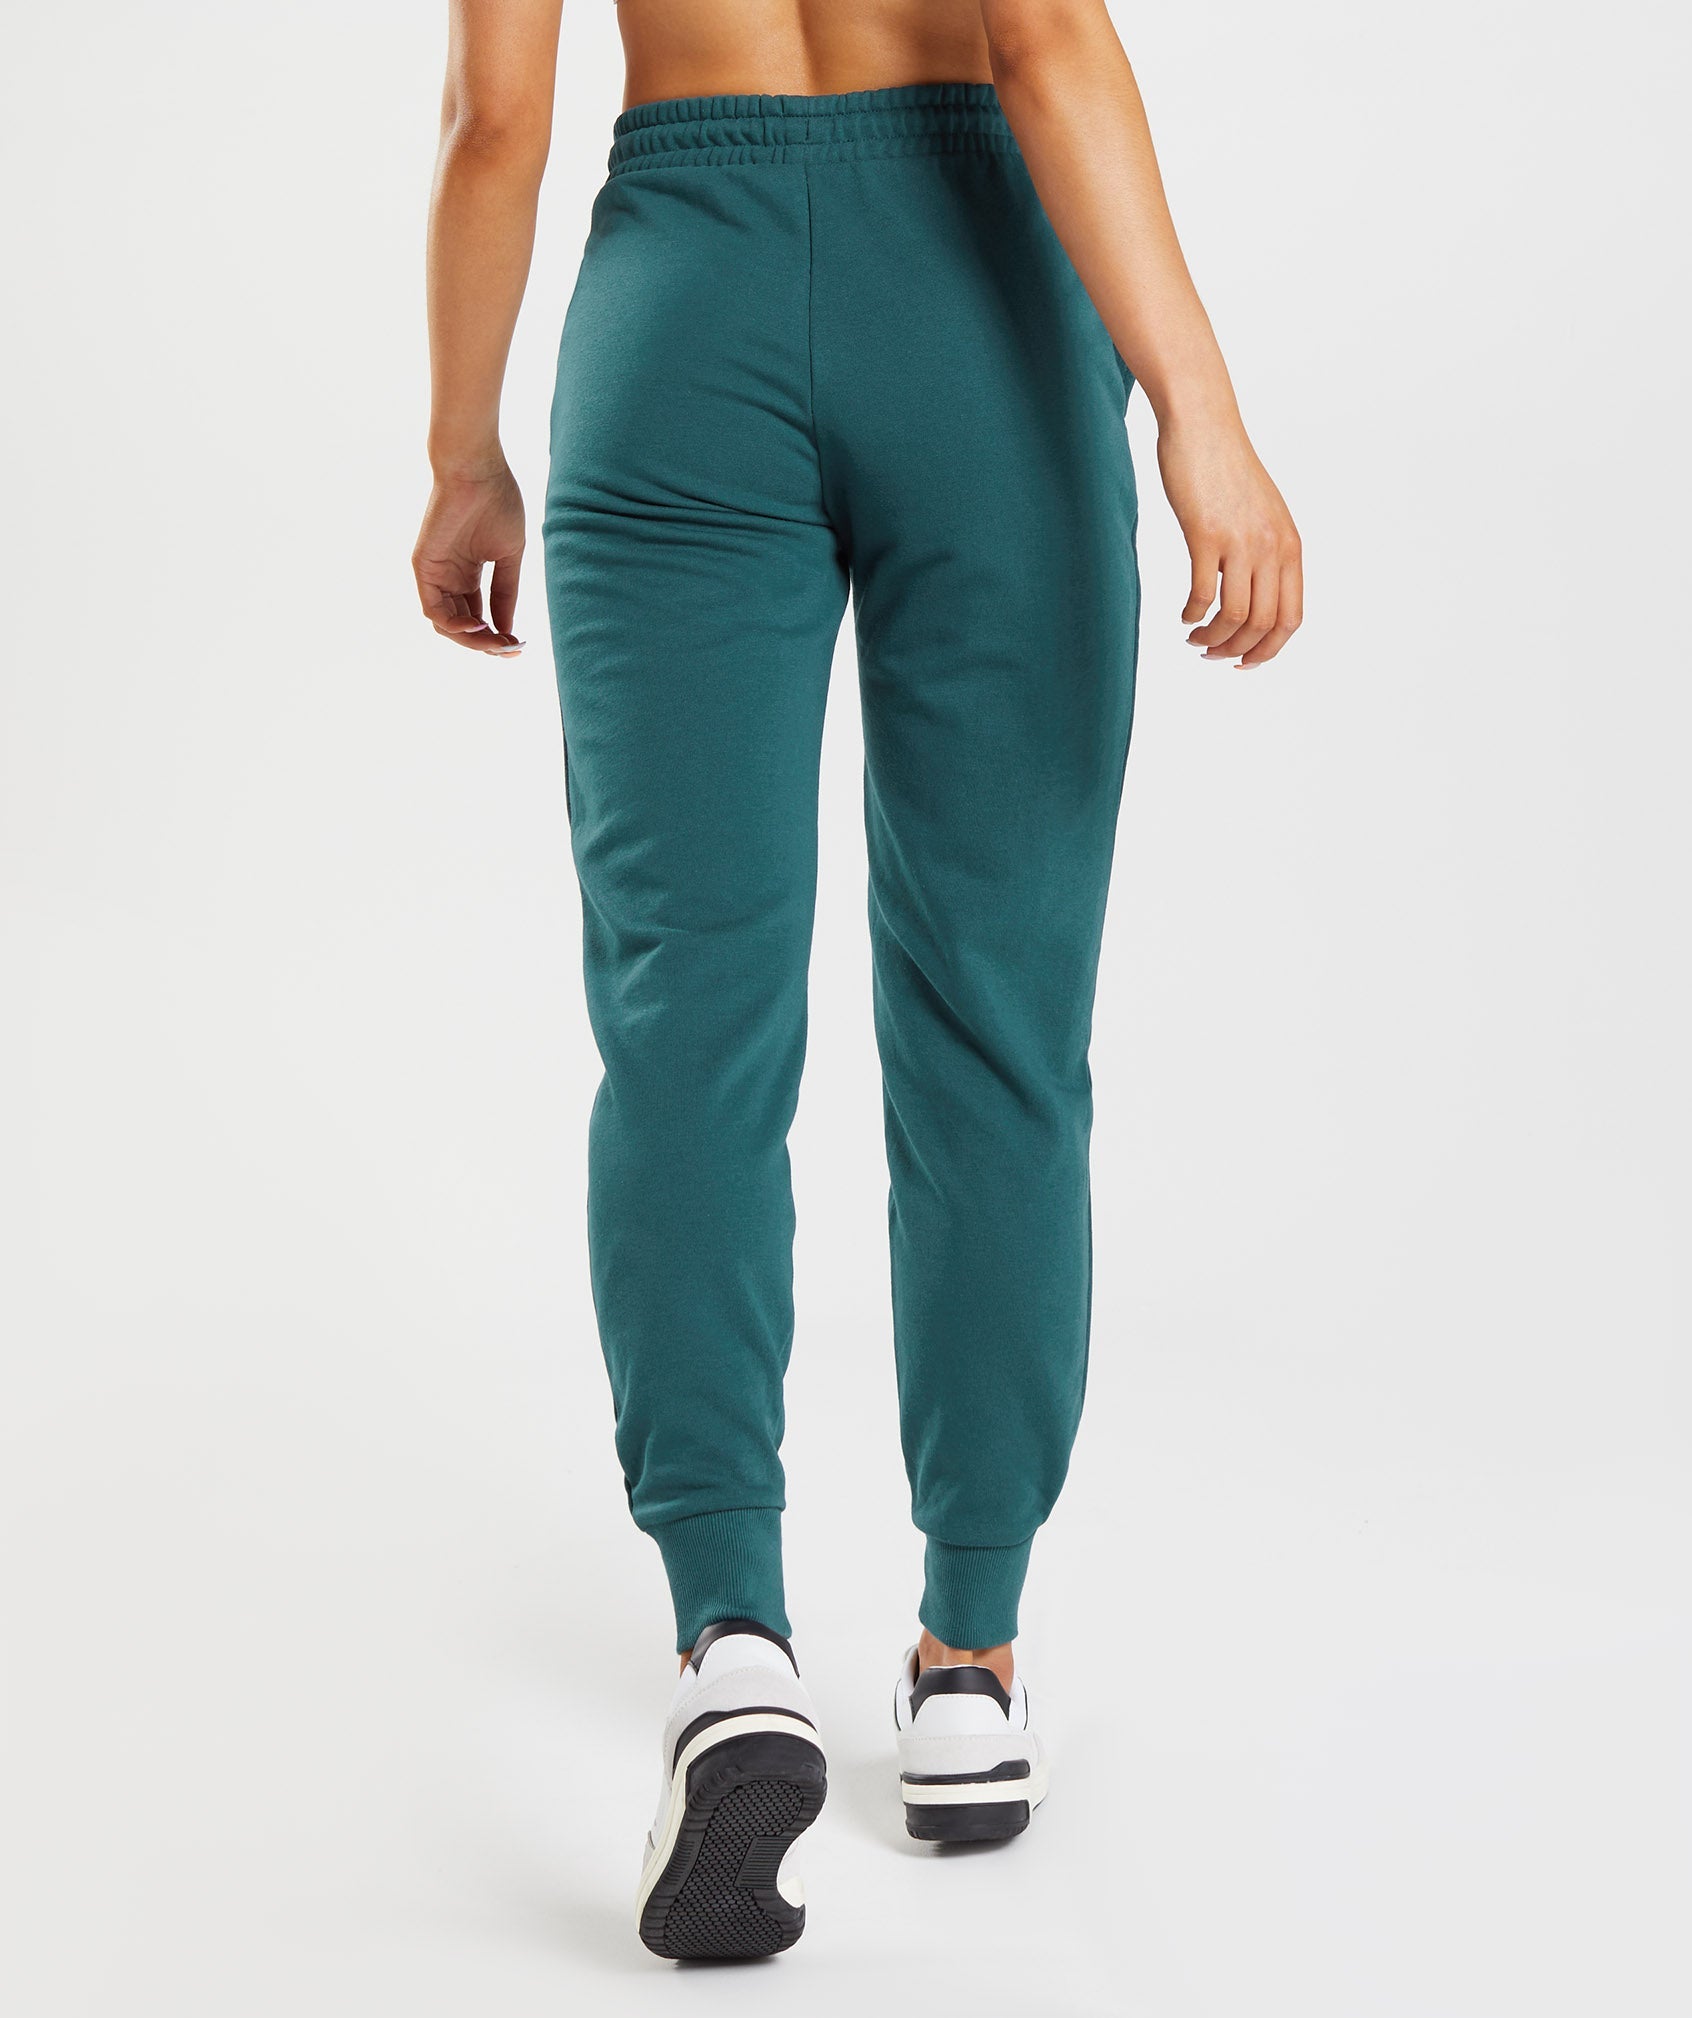 Training Joggers in Winter Teal